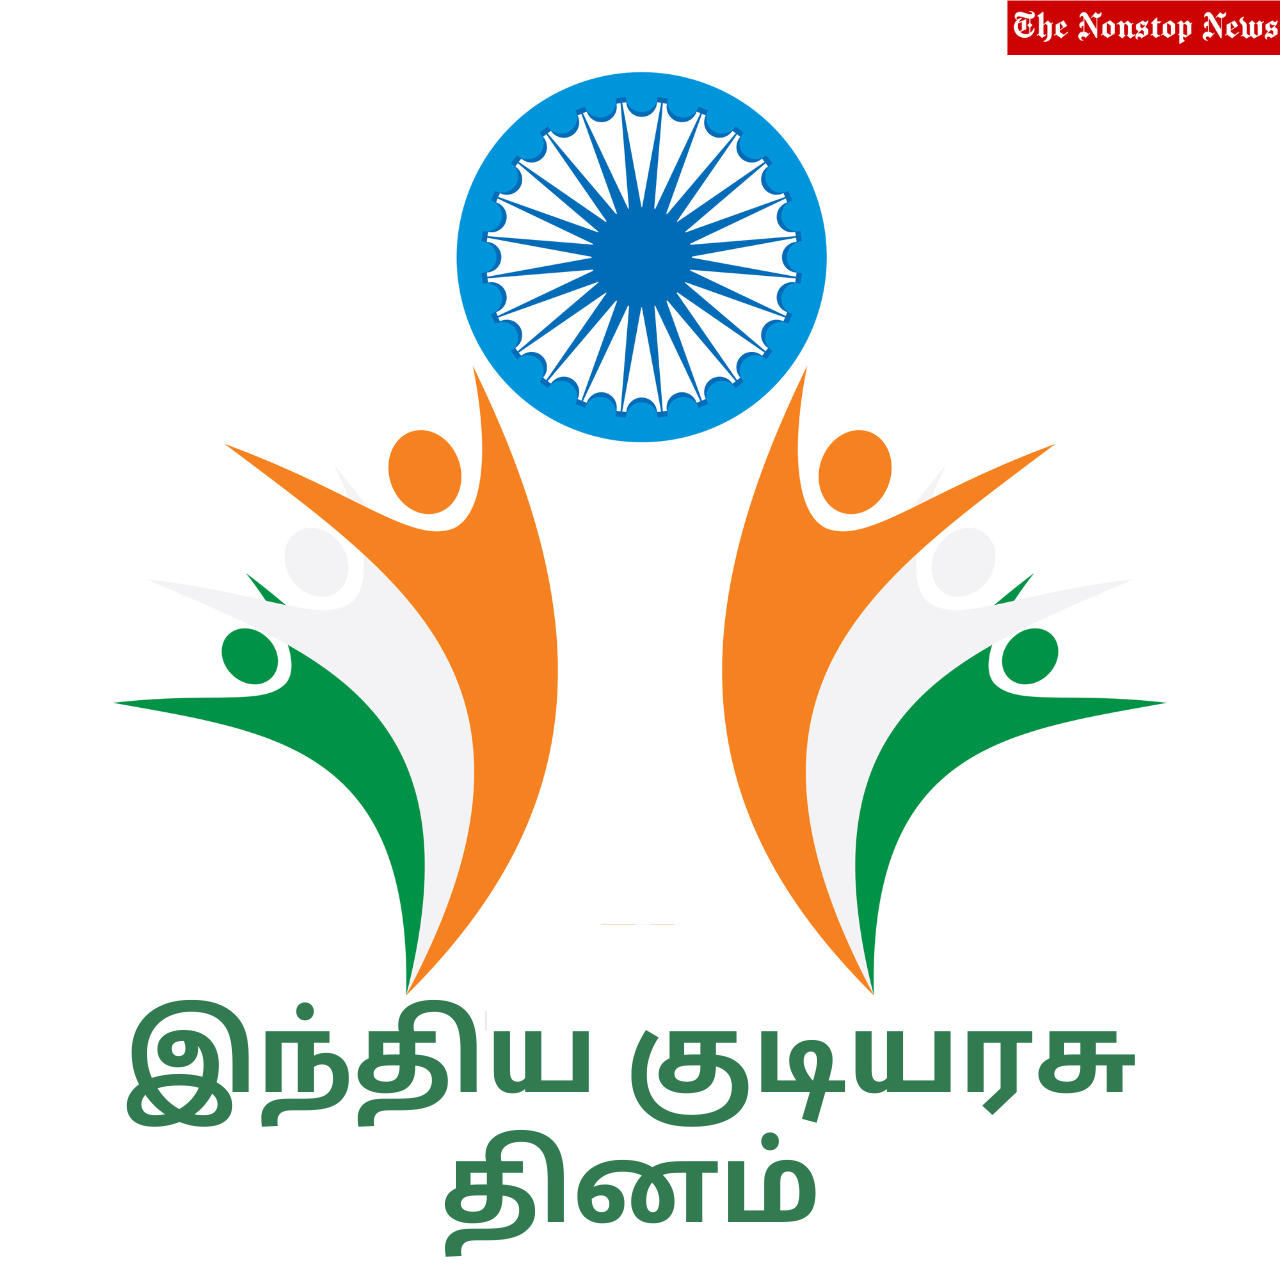 Republic Day Images in Tamil 2023 Sayings, Messages, Wishes, Quotes, Images, Greetings and Slogans